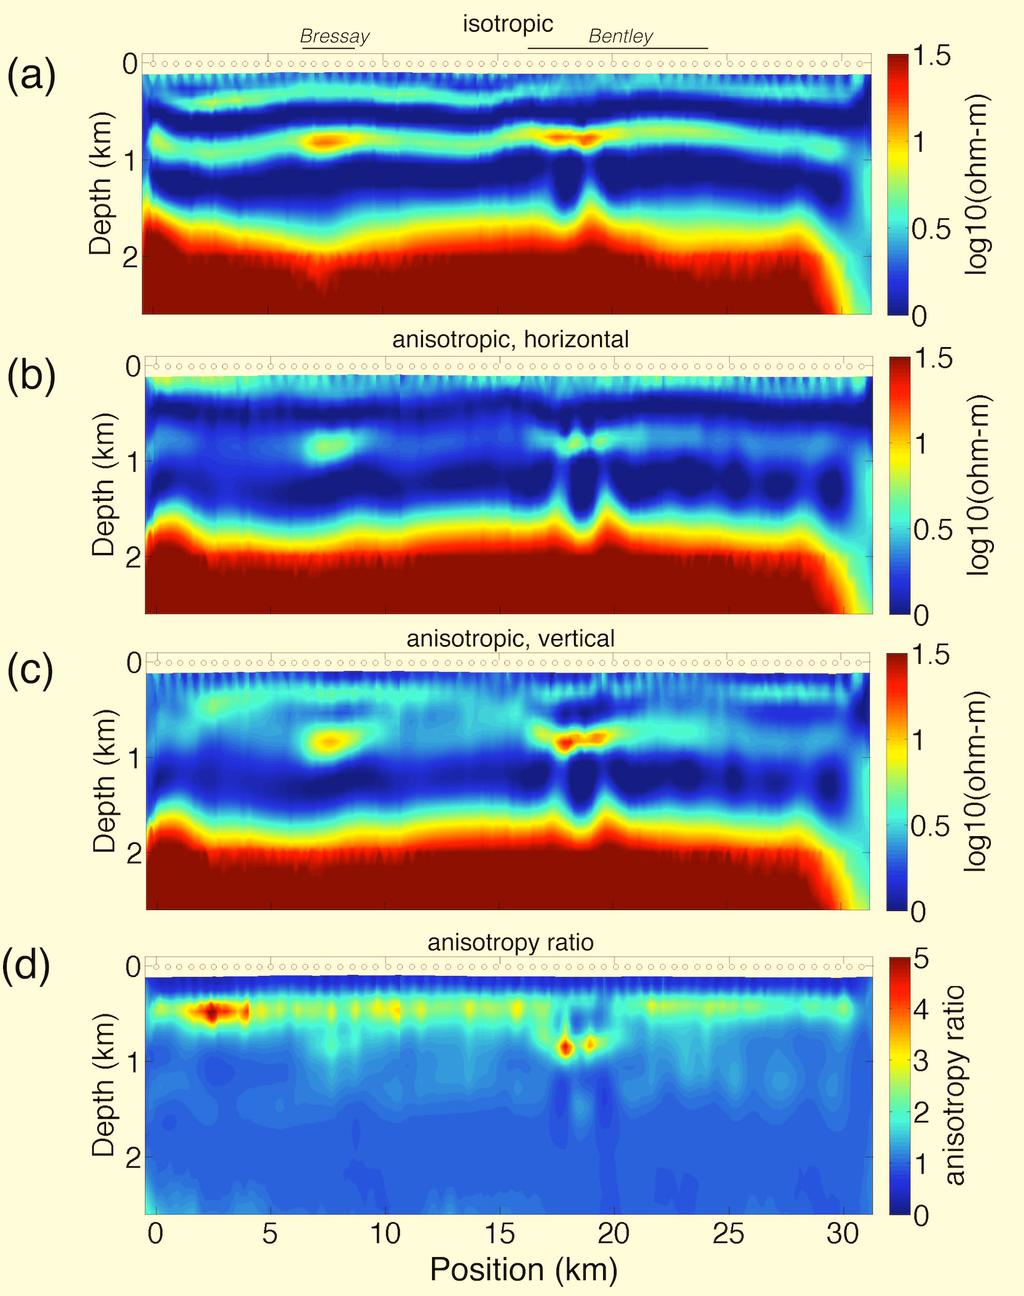 geology) inversion for isotropic resistivity resulted in strong horizontal bands of alternating resistive and conductive layers, with some evidence for increased resistivity at the locations of the